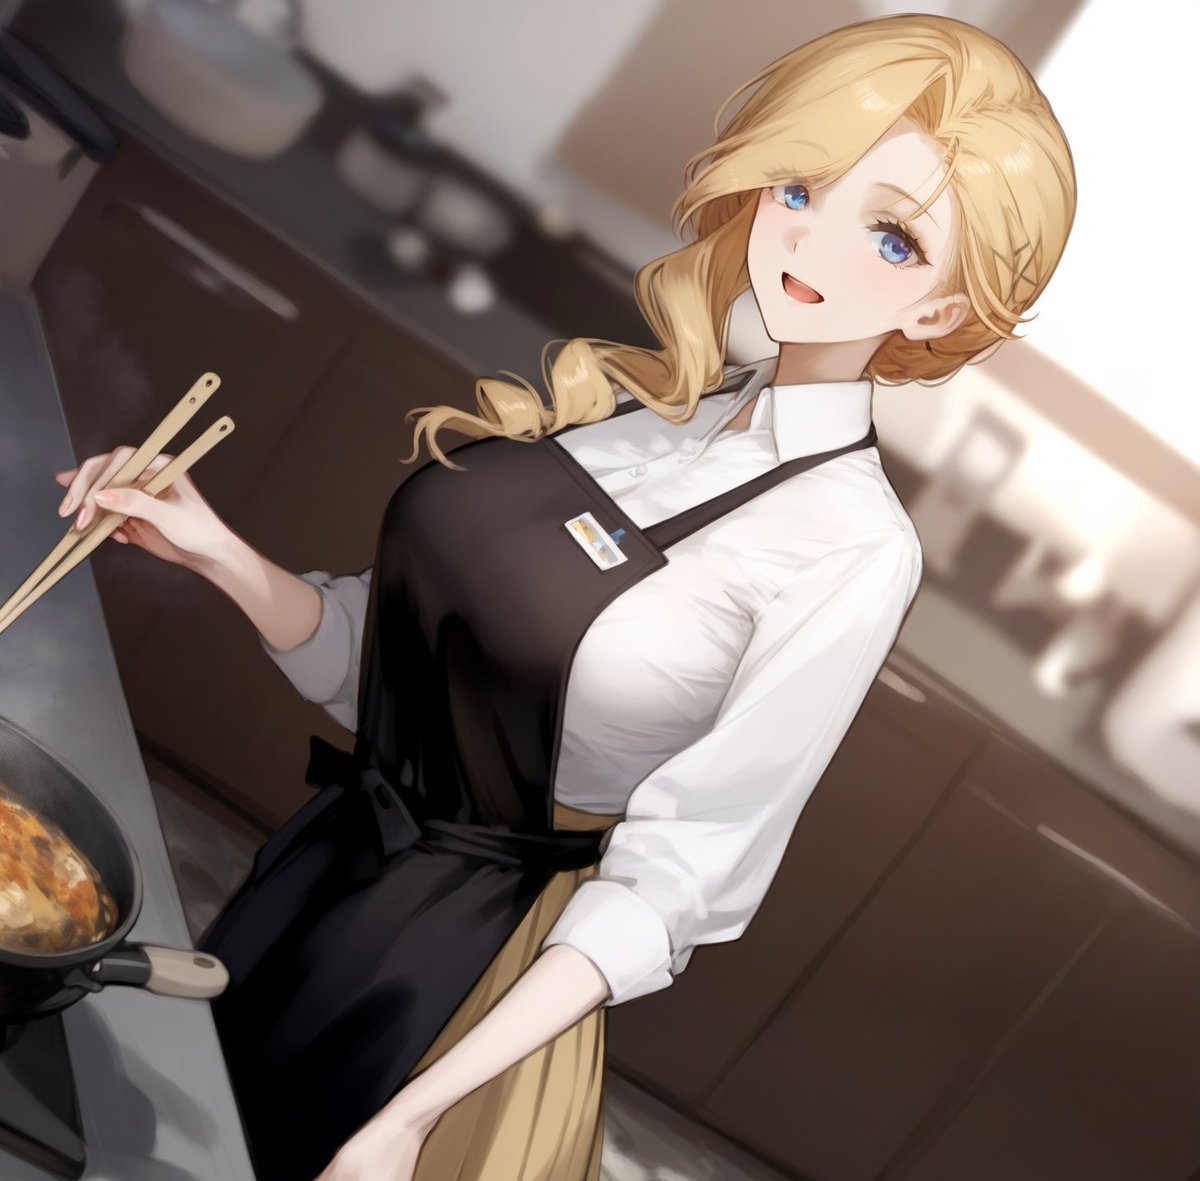 Hood cooking for lunch #AzurLane